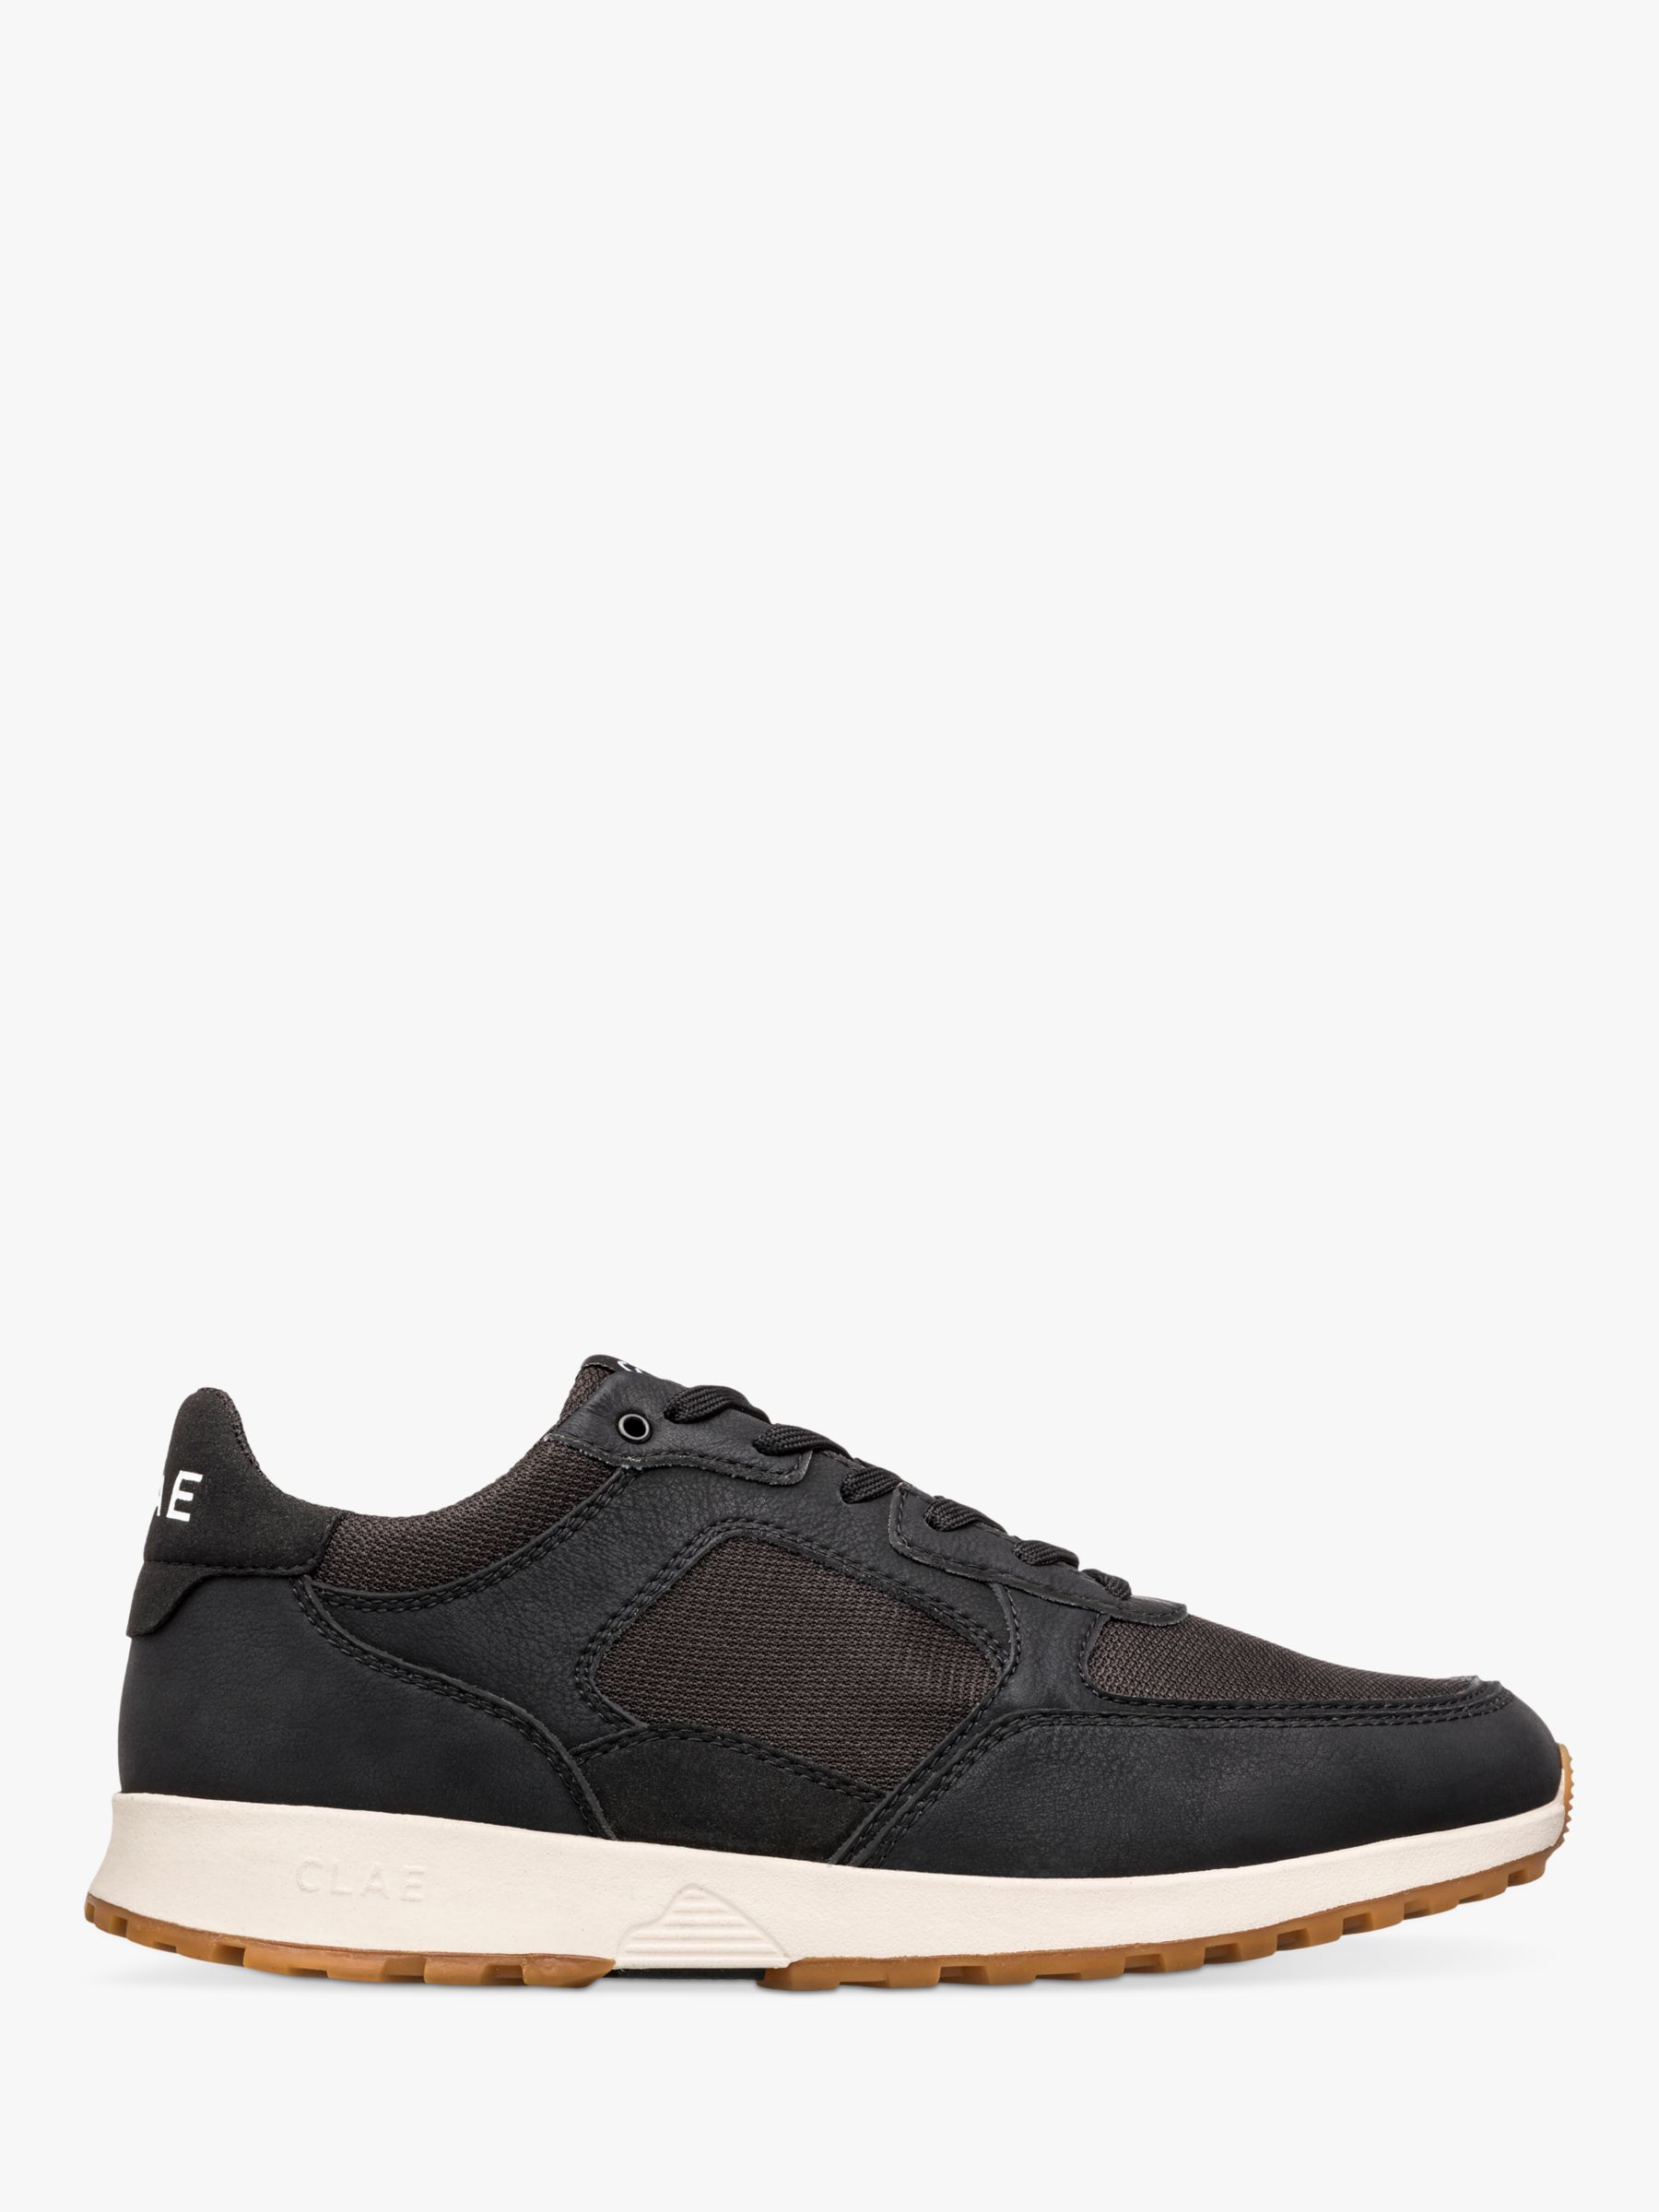 CLAE Joshua Lace Up Suede Trainers, Black at John Lewis & Partners